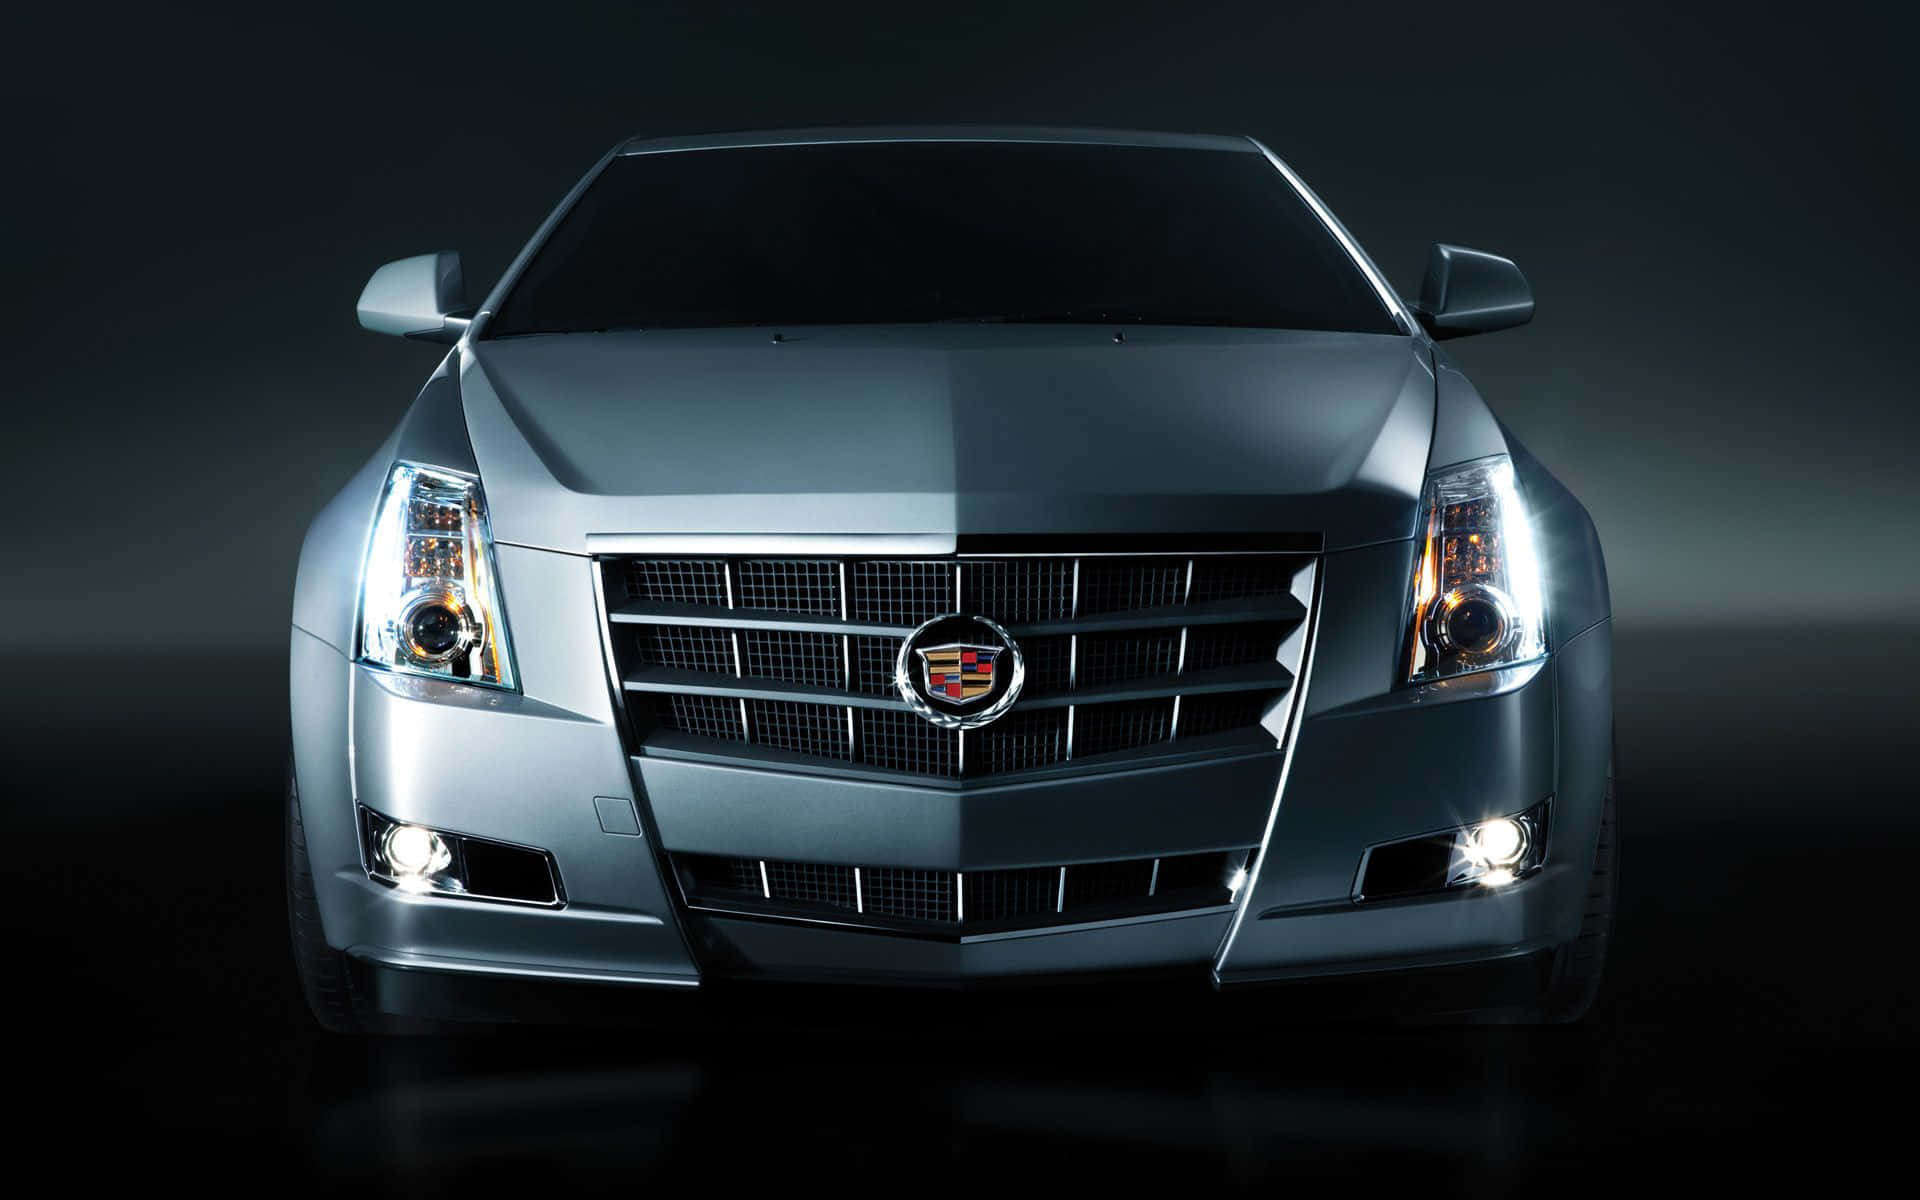 Sleek Silver Cadillac CTS on the Road Wallpaper